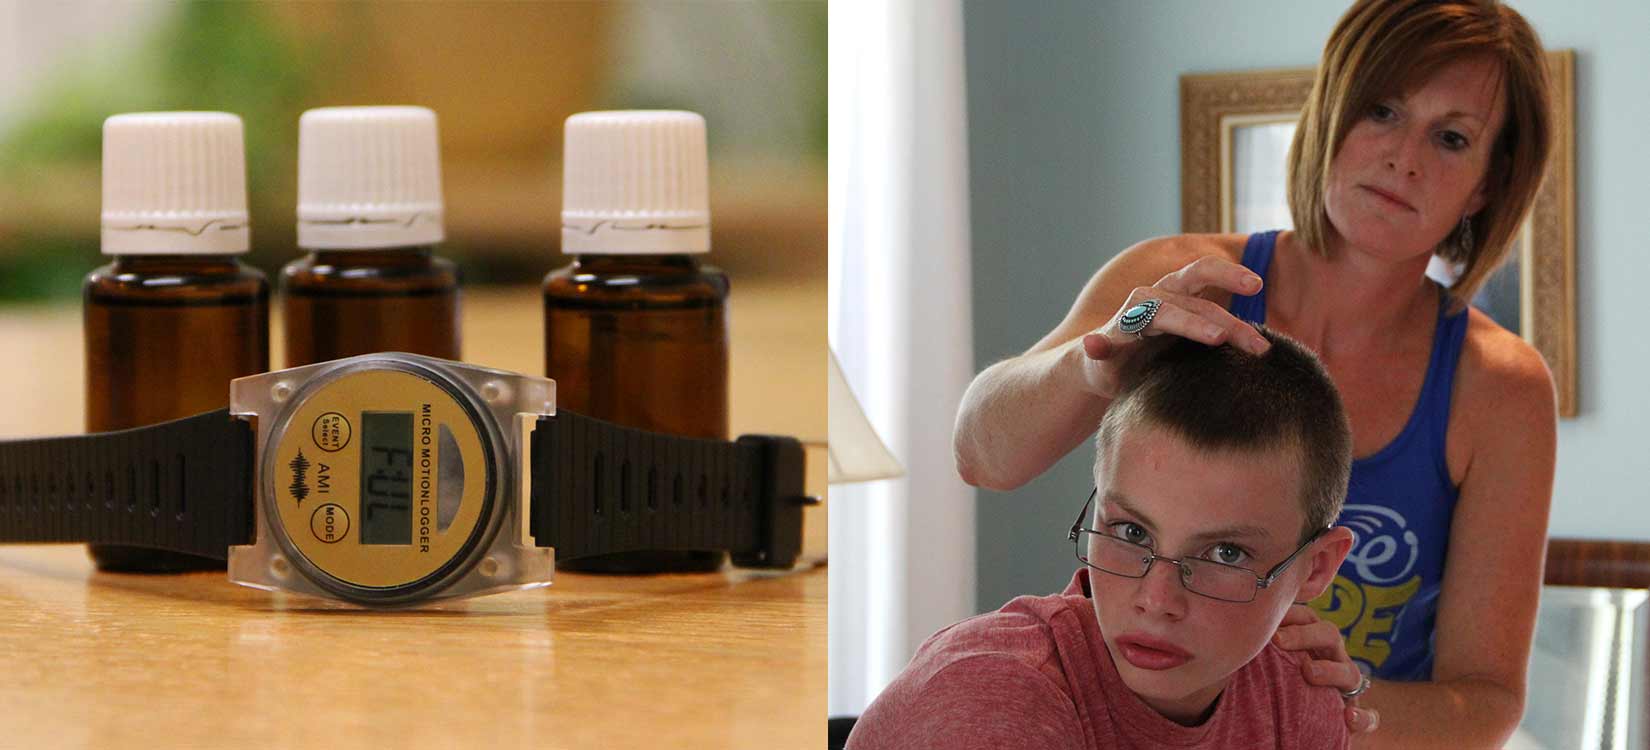 Bottles of essential oils with a watch and mother applying essential oils to son